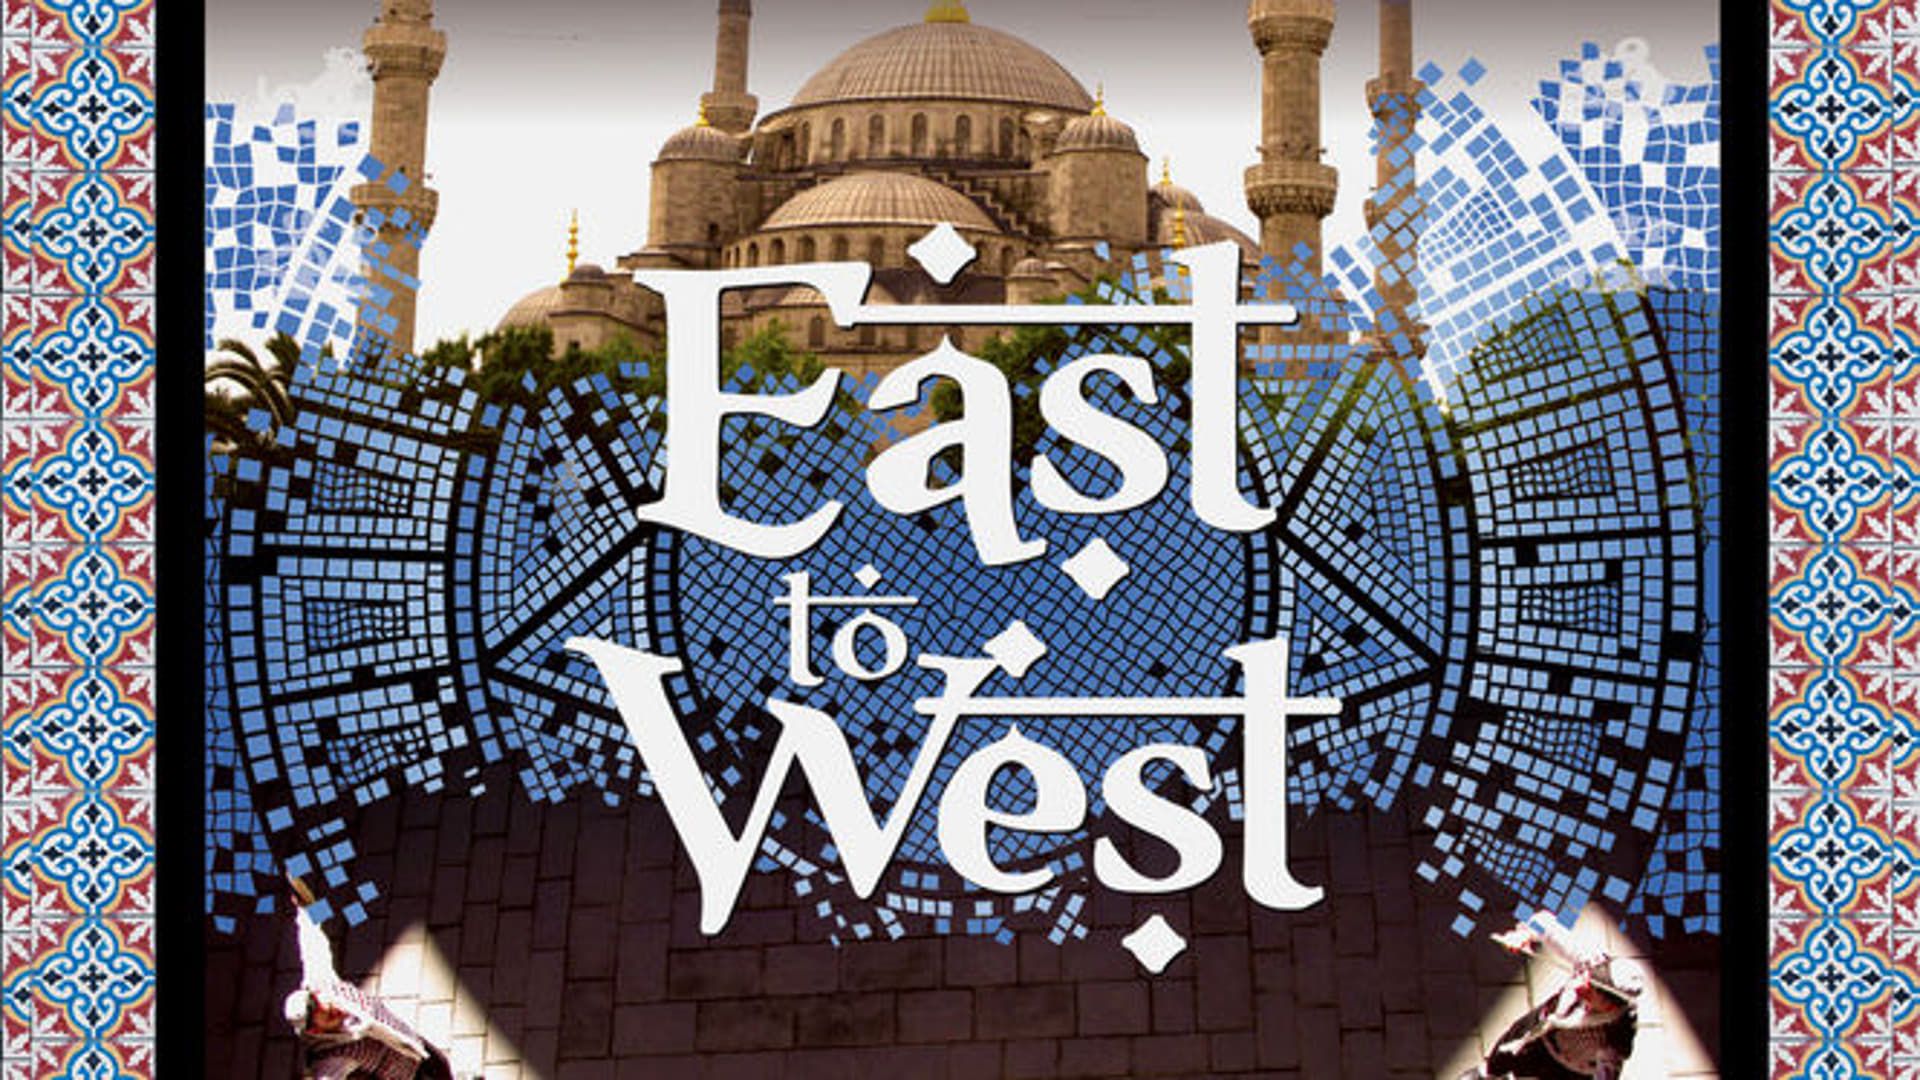 East to West background